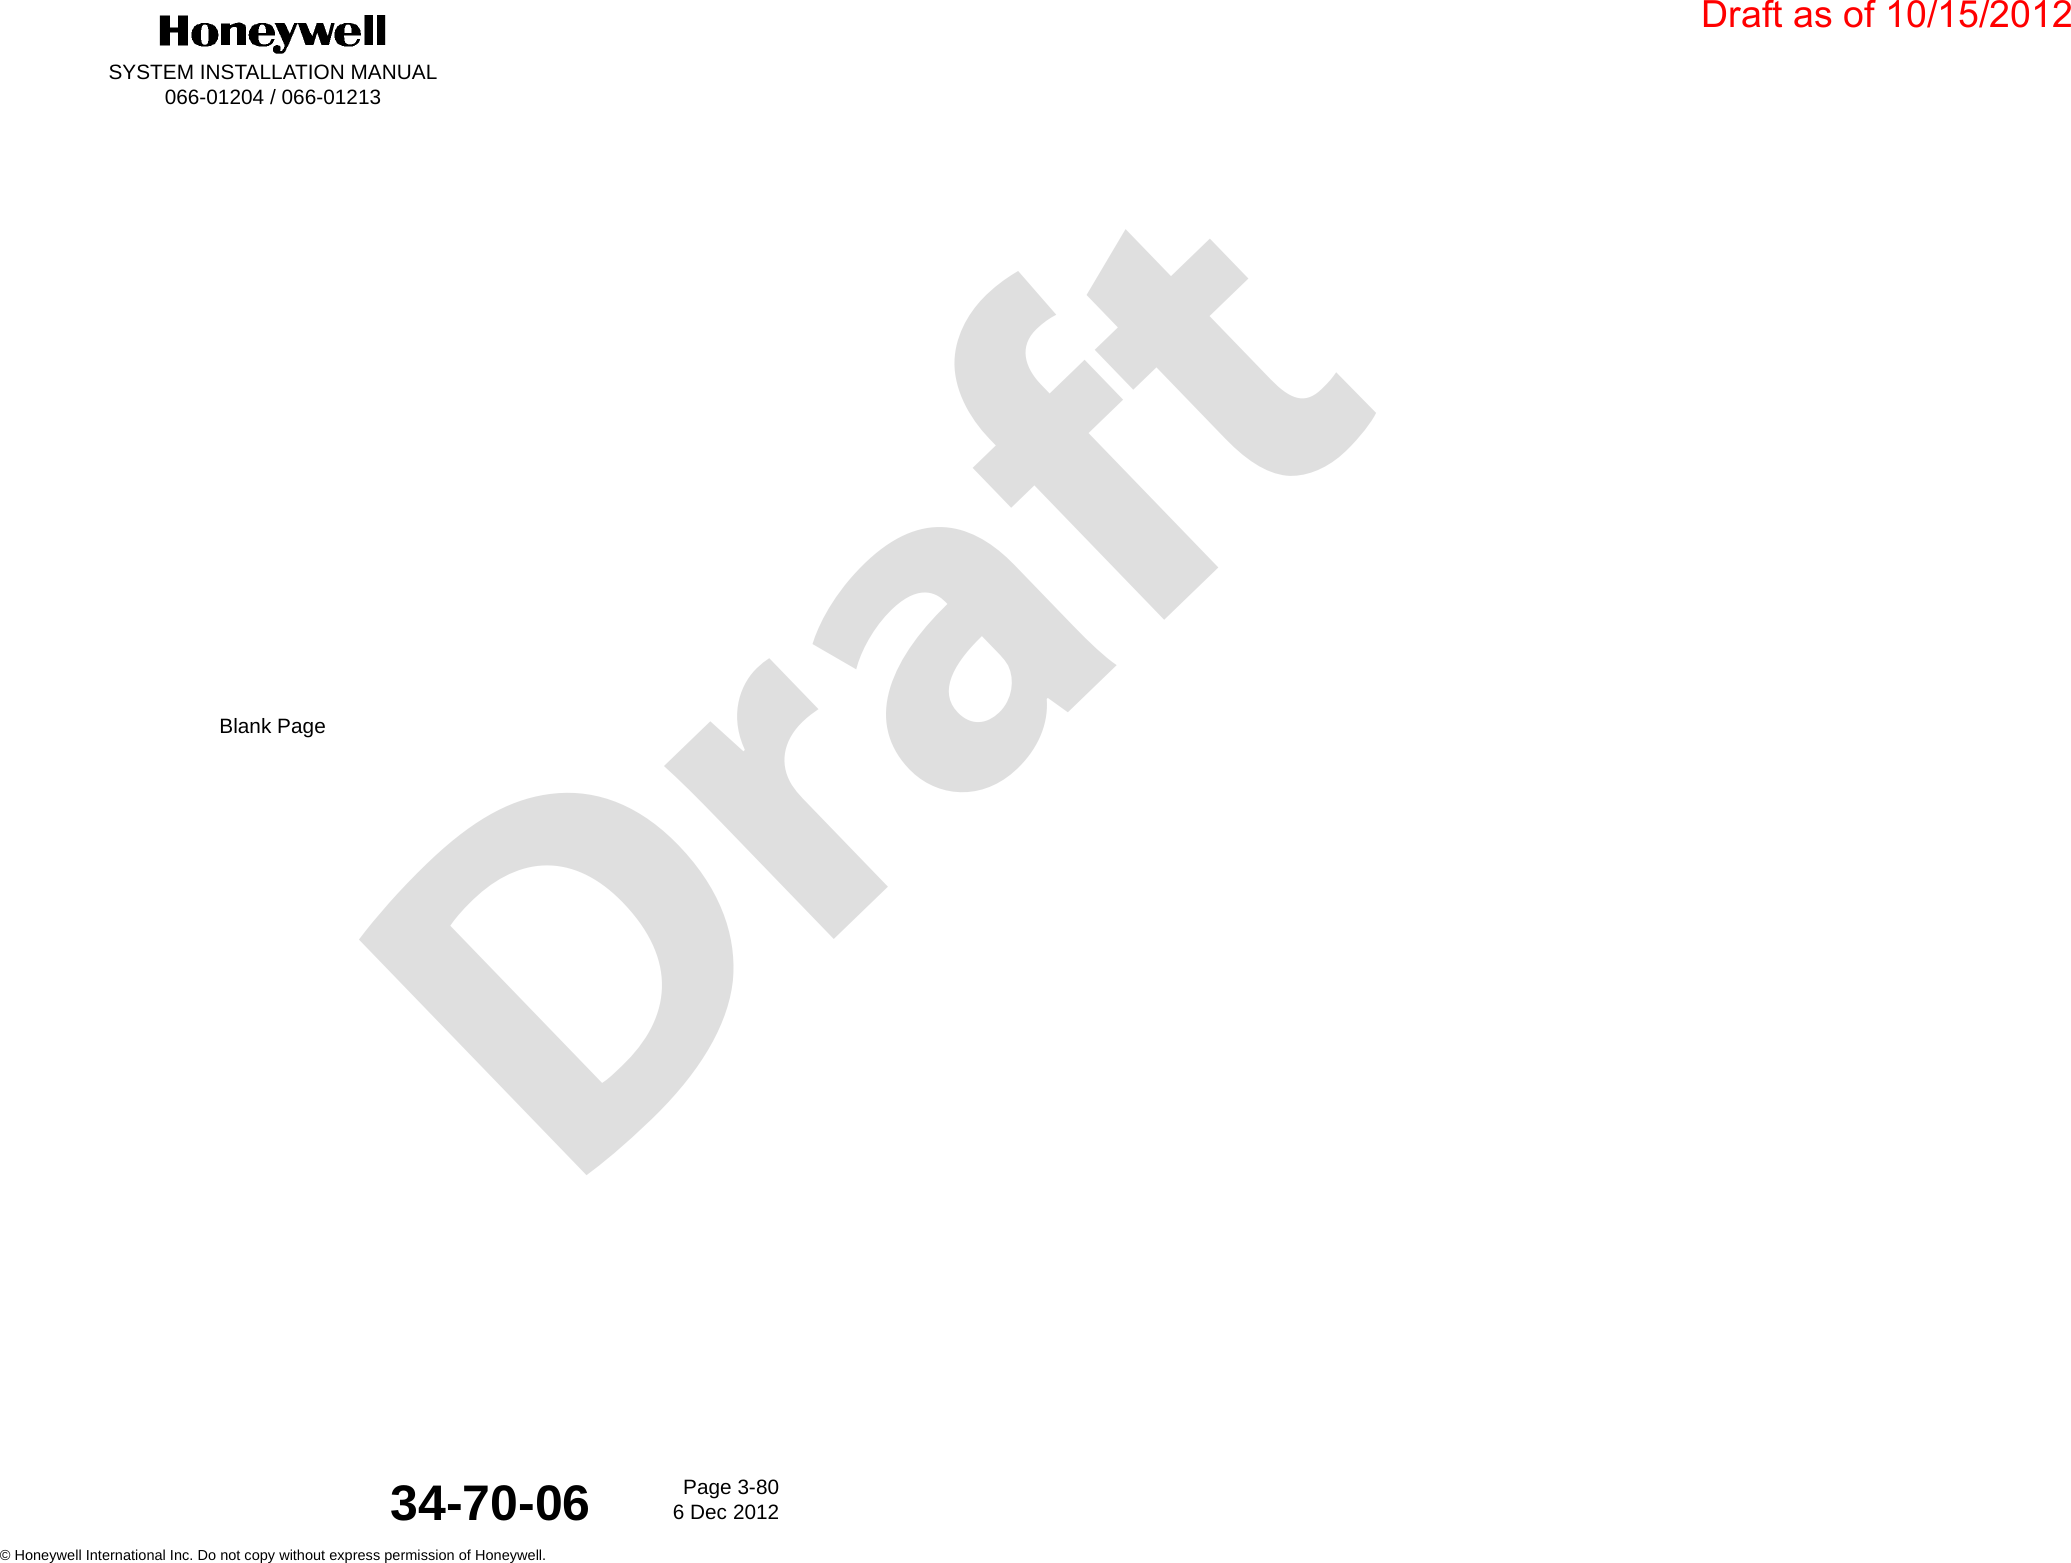 DraftSYSTEM INSTALLATION MANUAL066-01204 / 066-01213Page 3-806 Dec 2012© Honeywell International Inc. Do not copy without express permission of Honeywell.34-70-06Blank PageDraft as of 10/15/2012